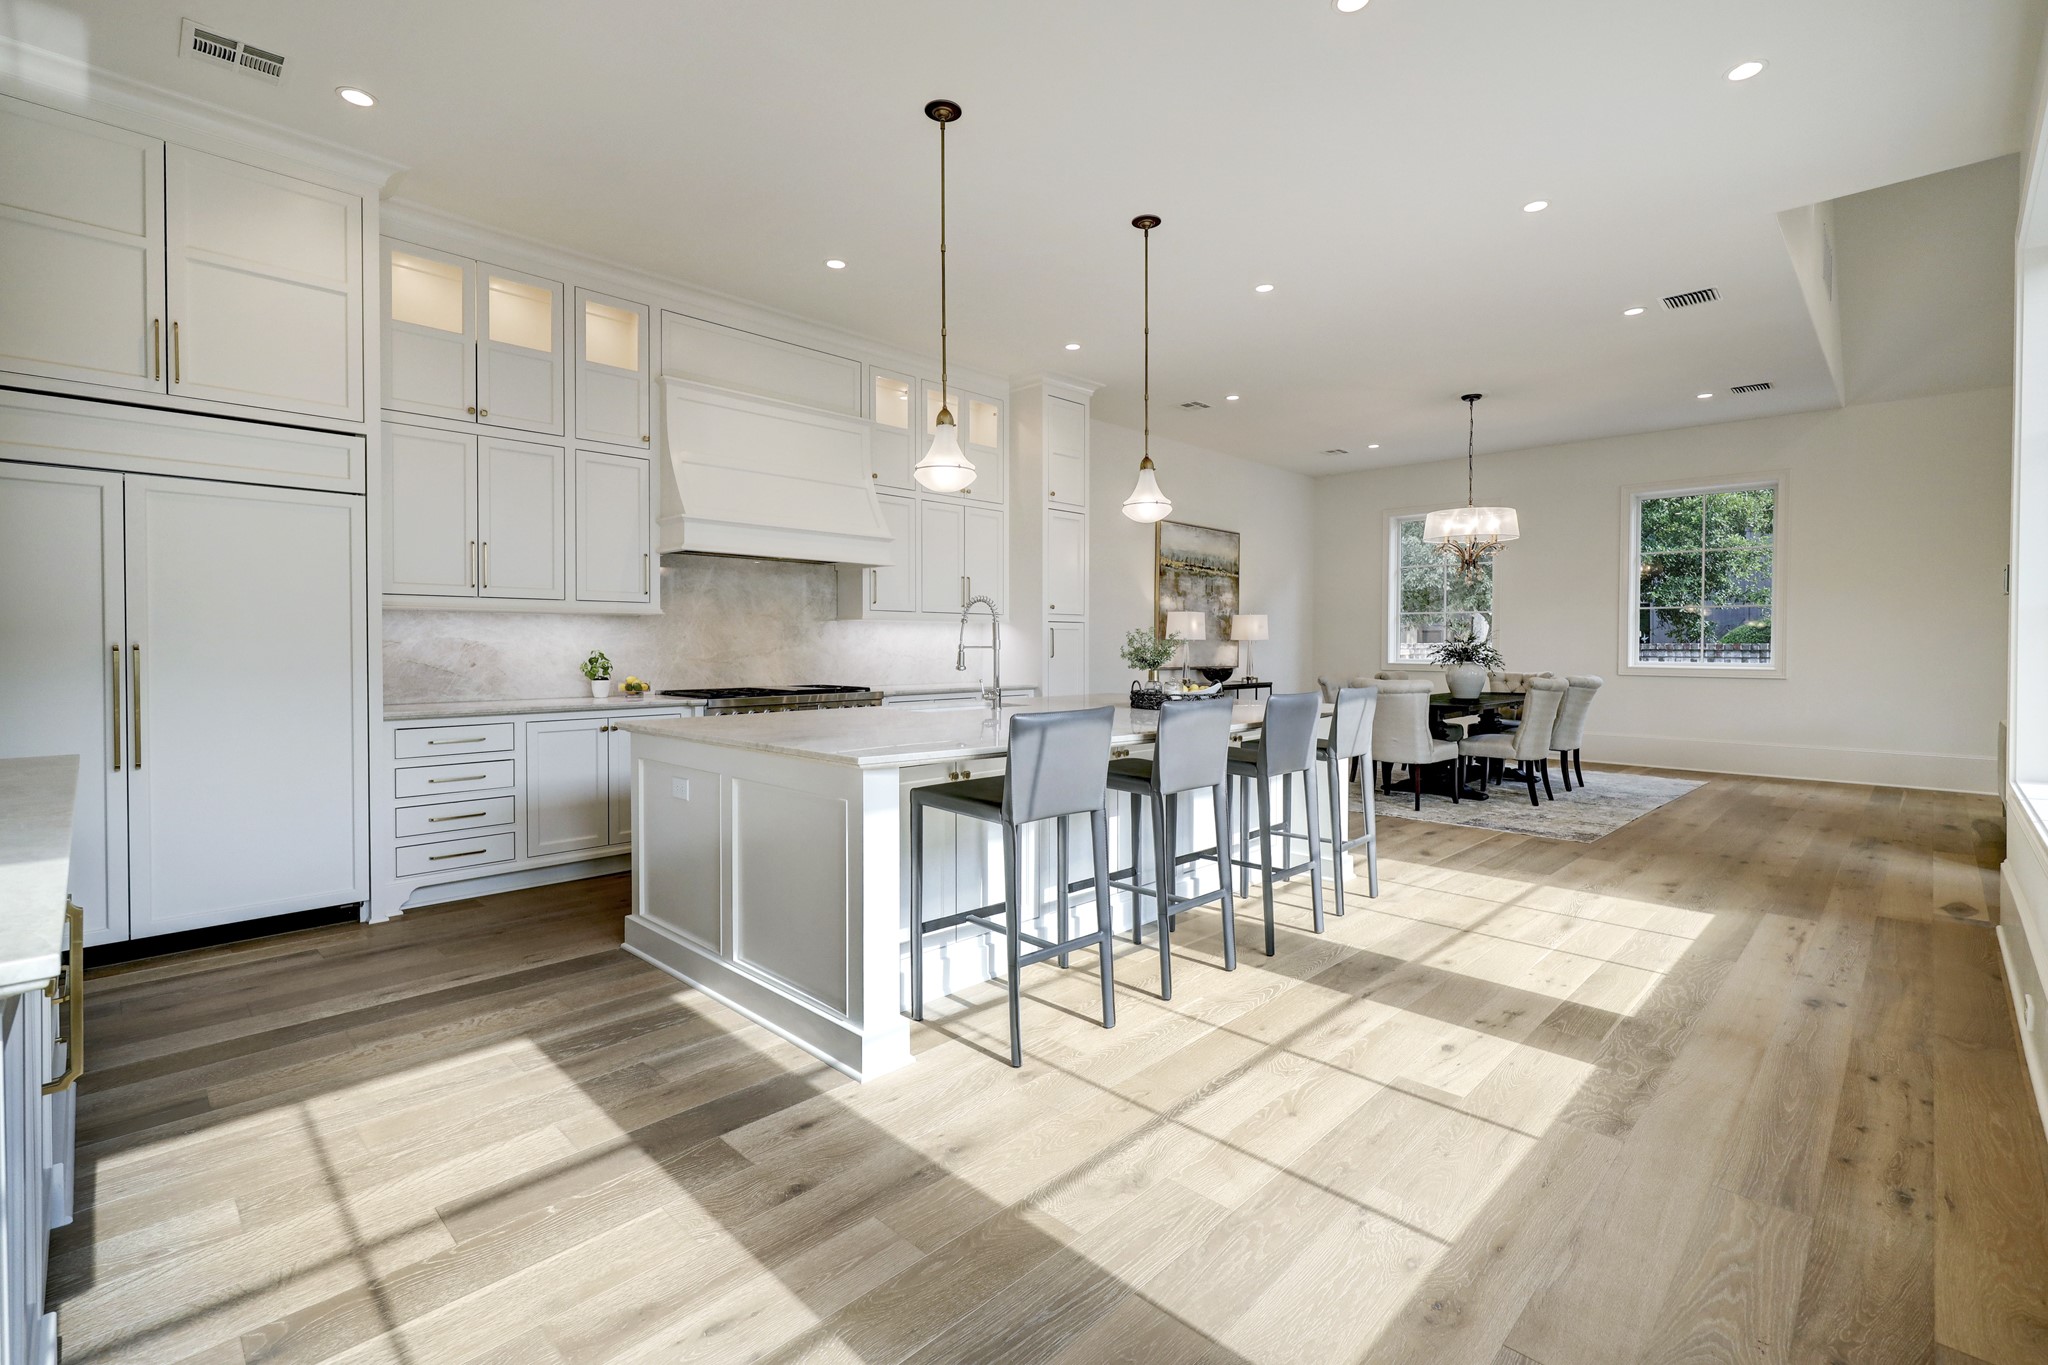 Kitchen features custom cabinetry, Wolf range and Subzero refrigerator and wine cooler.